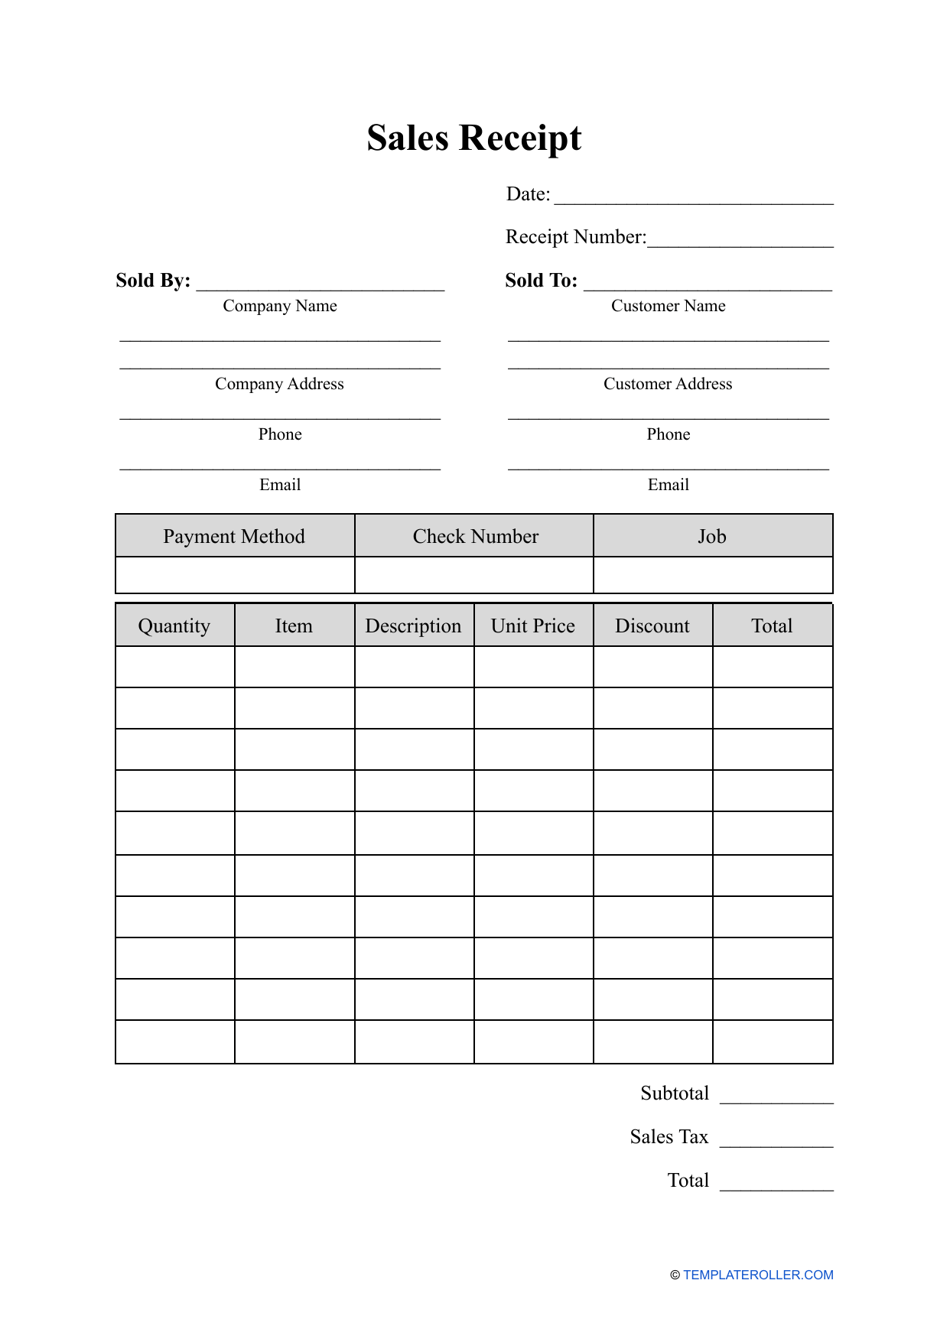 Sales Receipt Template, Page 1